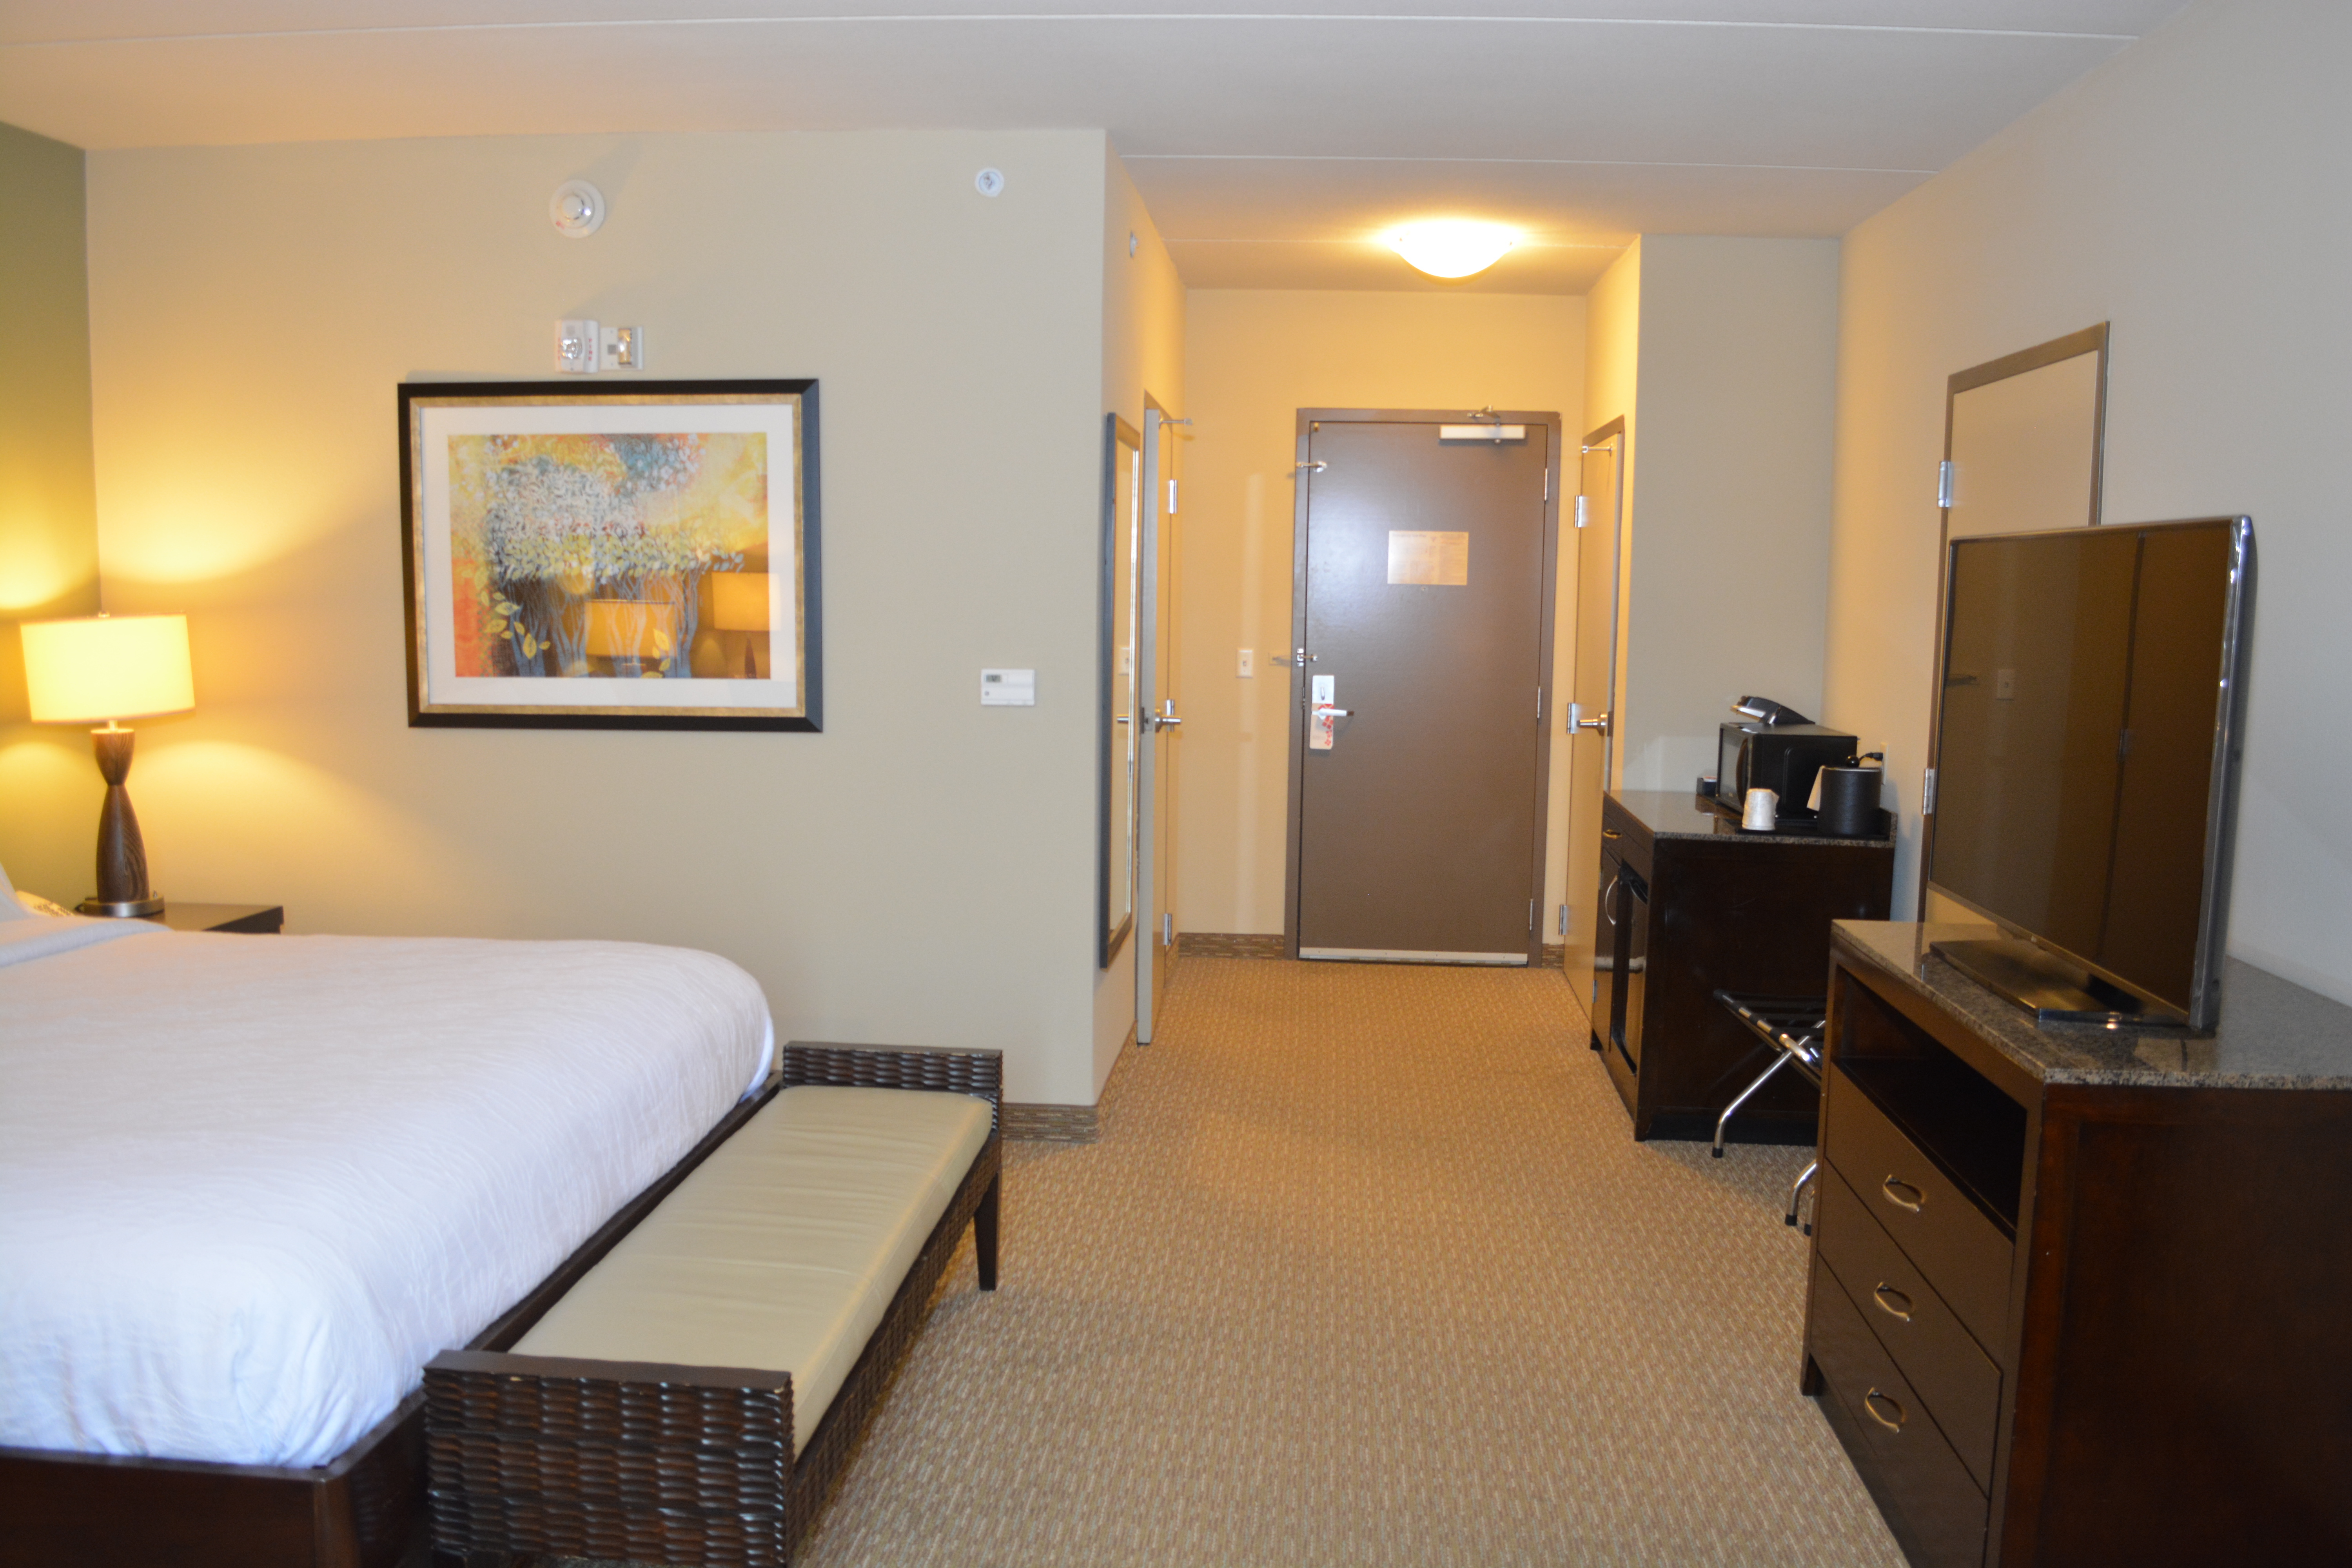 King-Size Bed, TV, Microwave, and Mini-Fridge in Accessible Guest Room